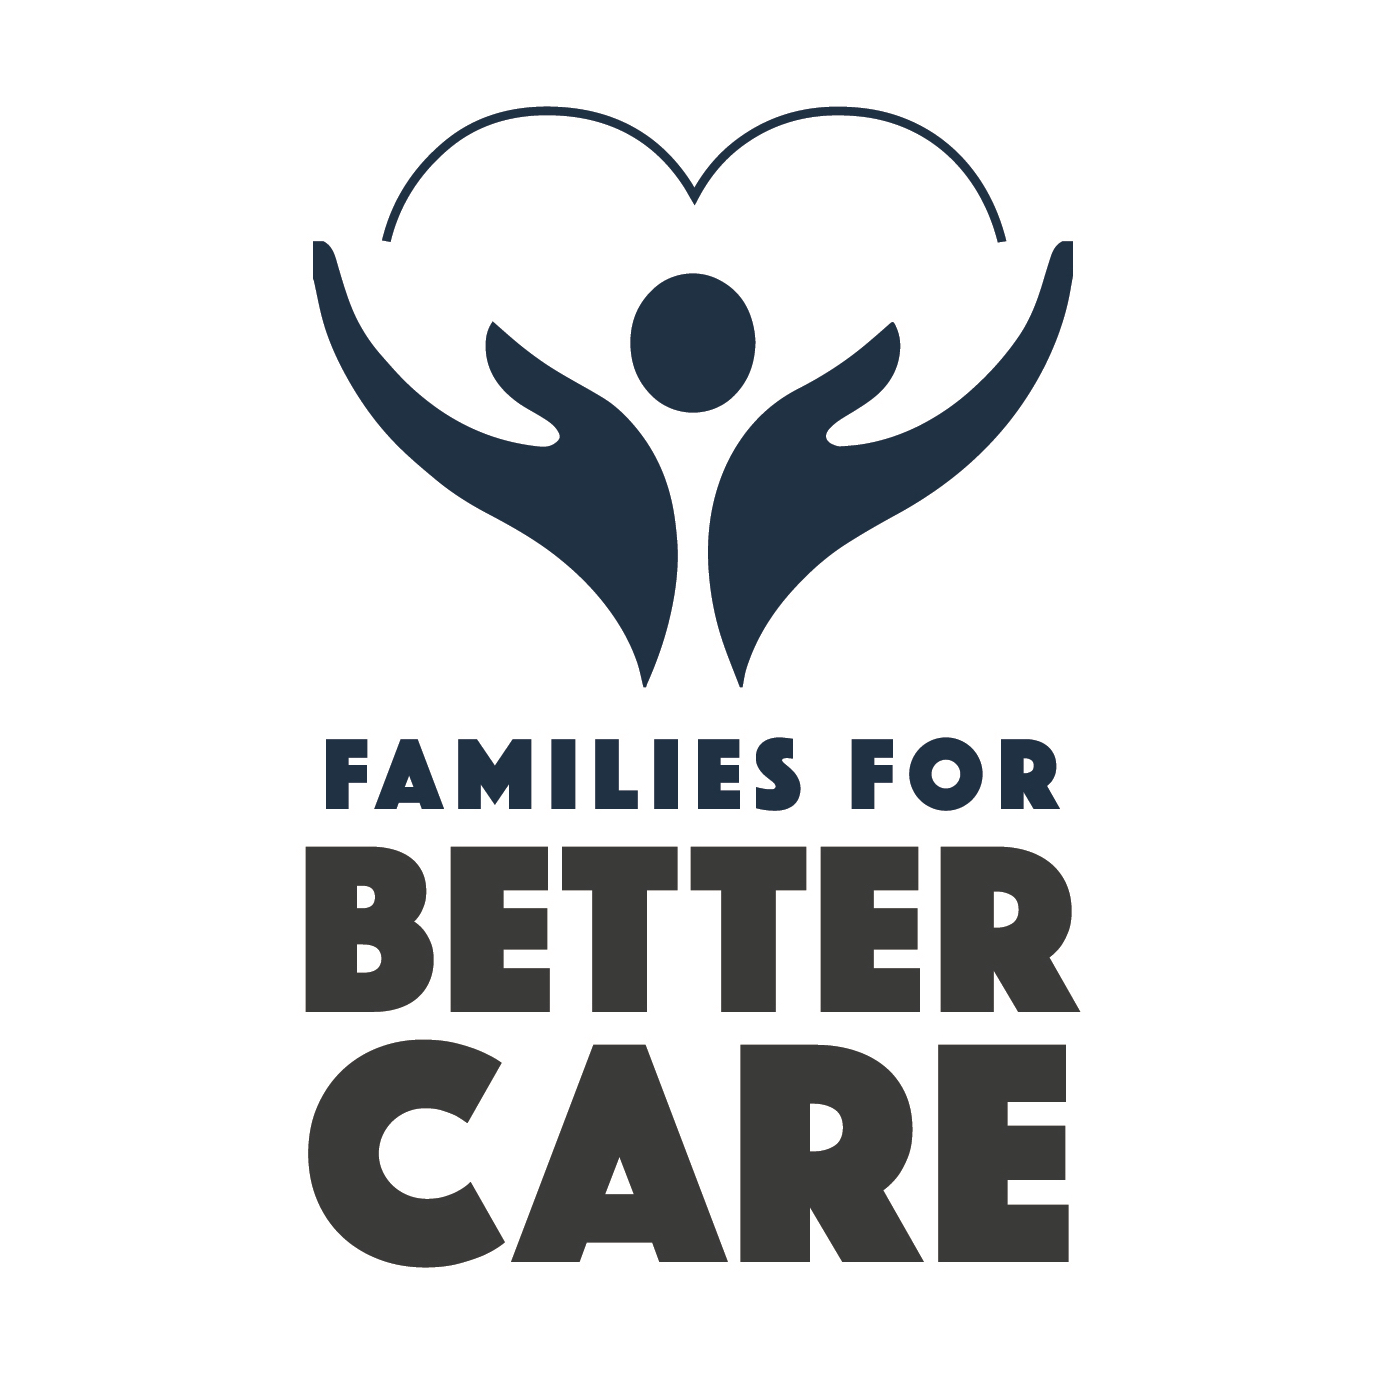 Families for Better Care Nursing Home Brian Lee Image